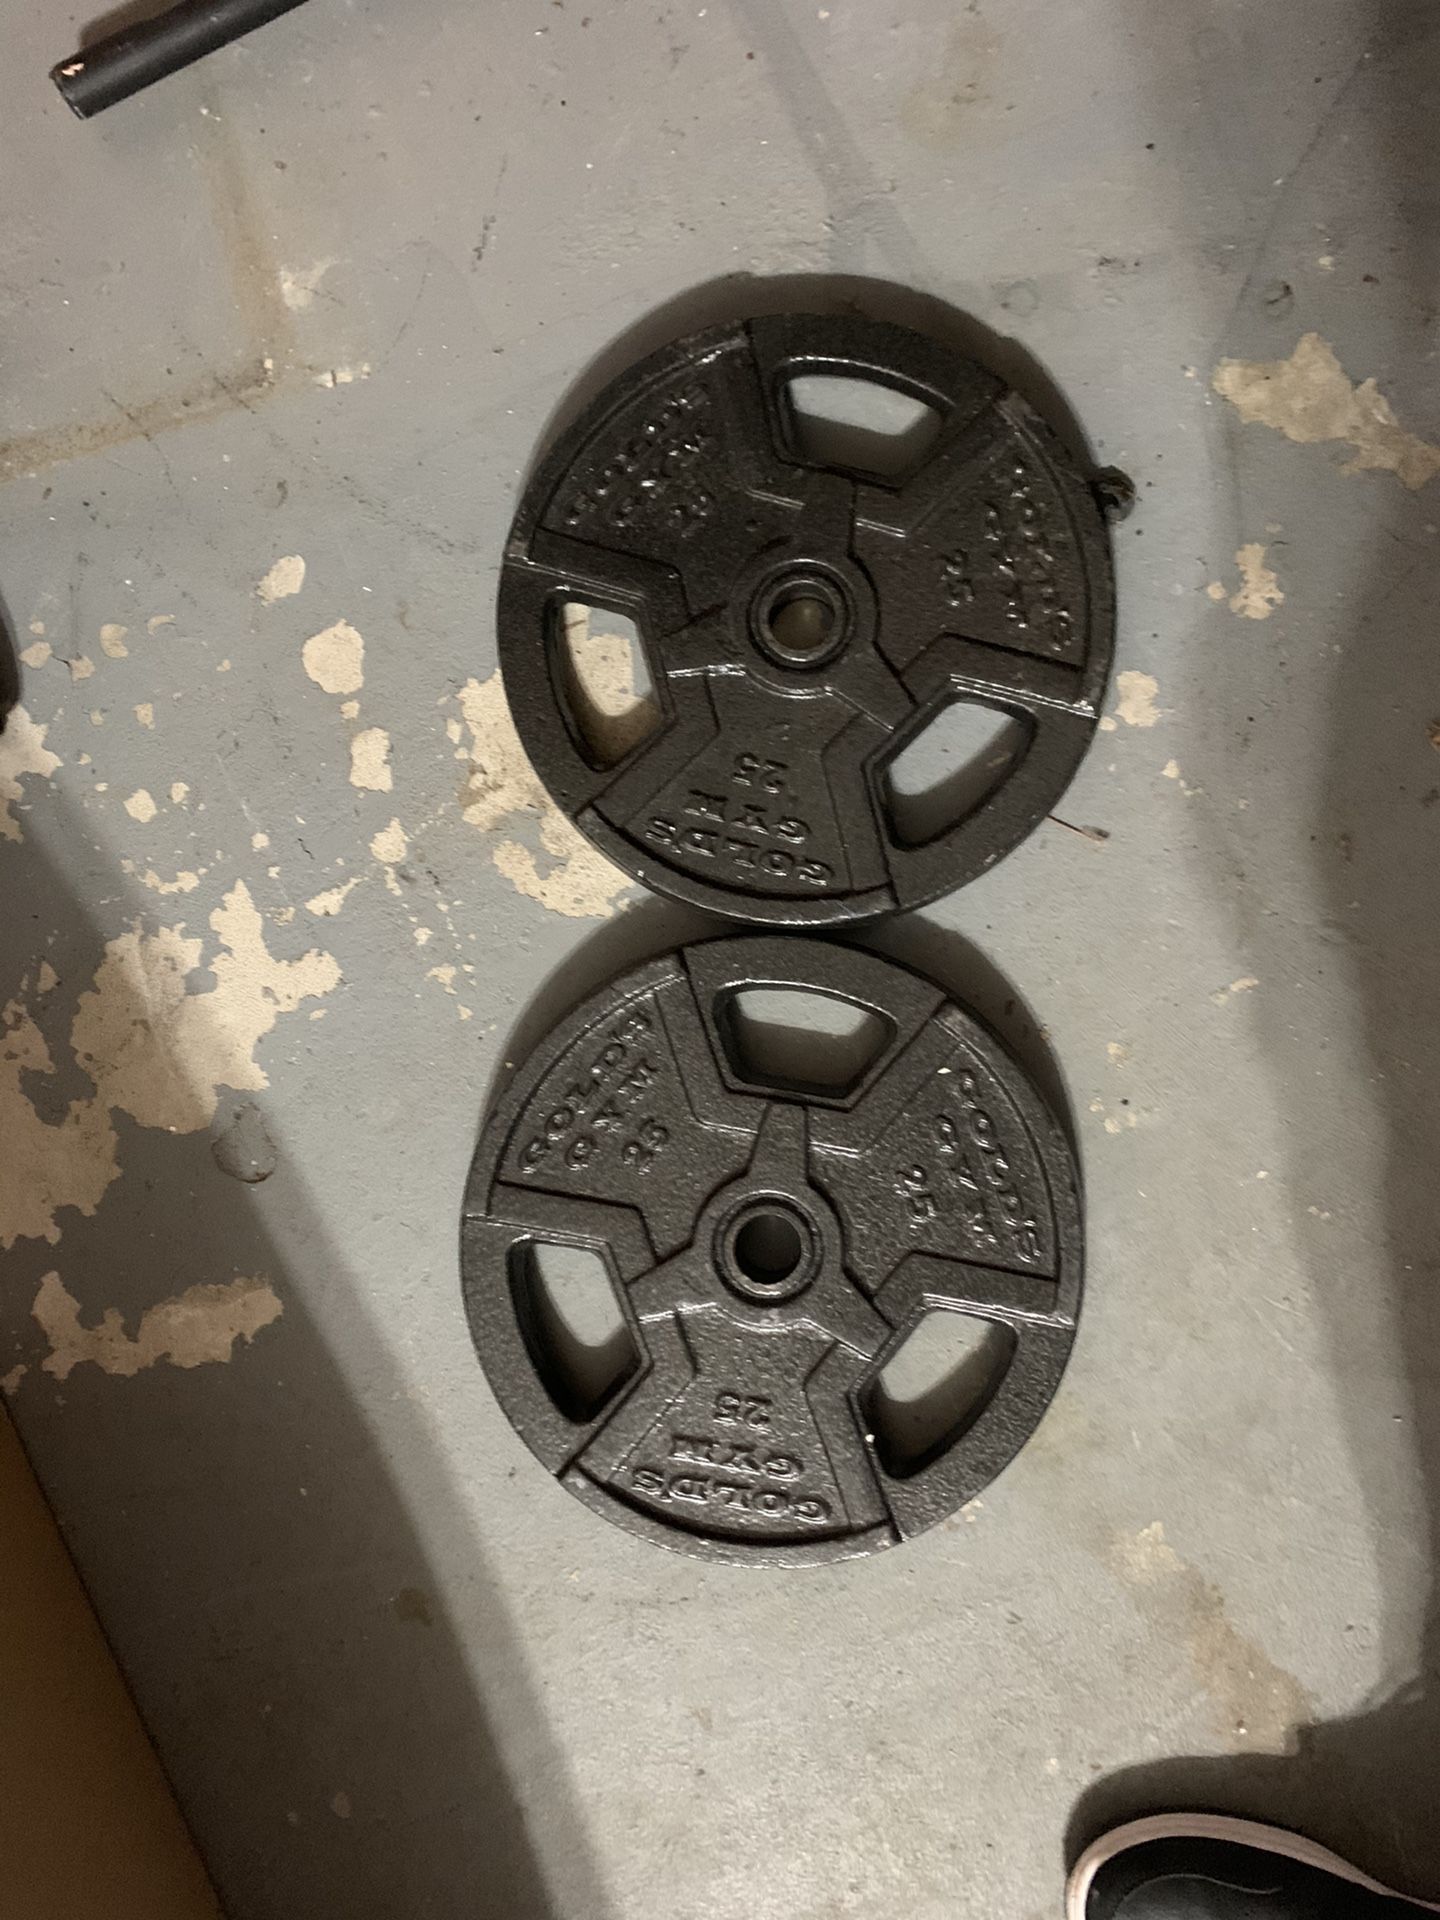 25 lbs weight plates for 1 inch bar. Each $20. 2 available